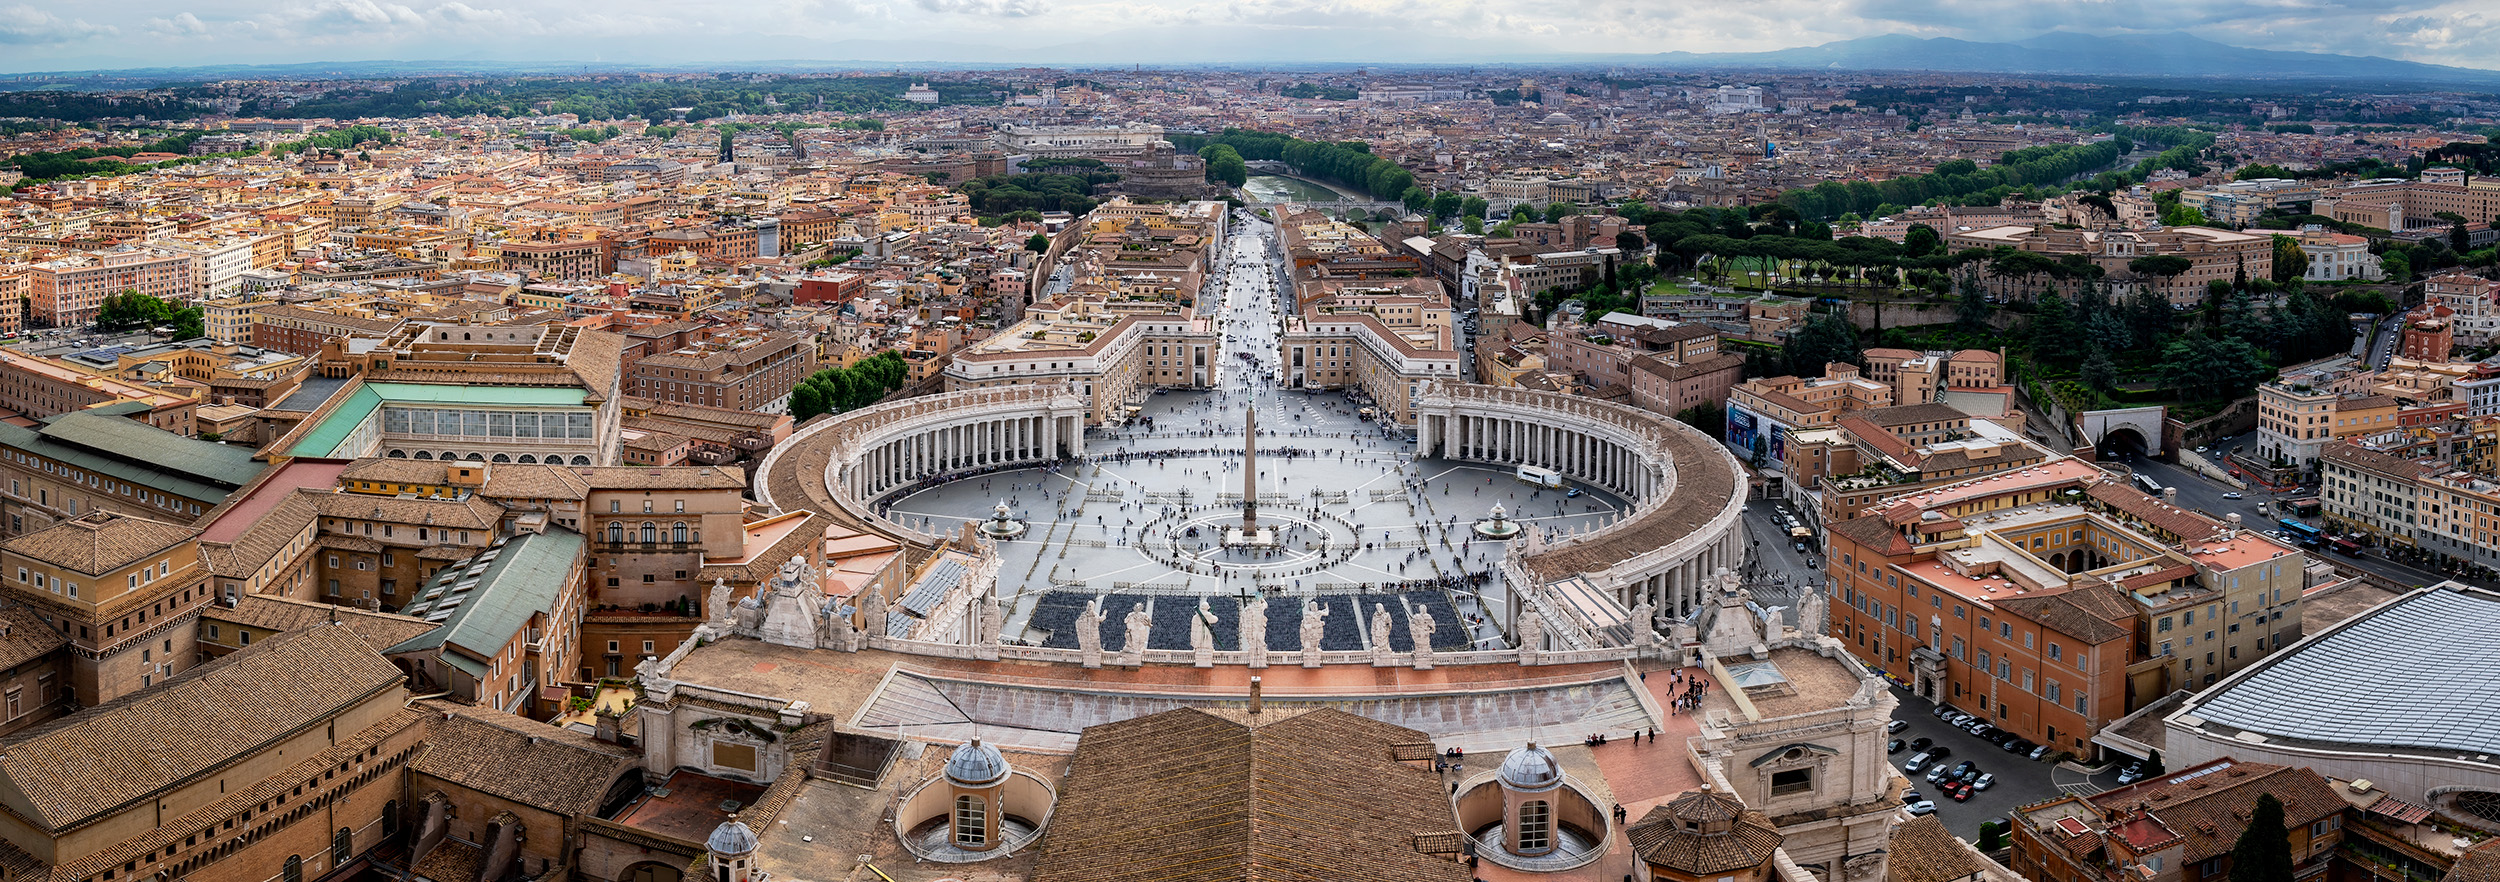 To capture this panoramic image of the grounds in front of St. Peter's Basilica, one must navigate through a labyrinth of passageways...